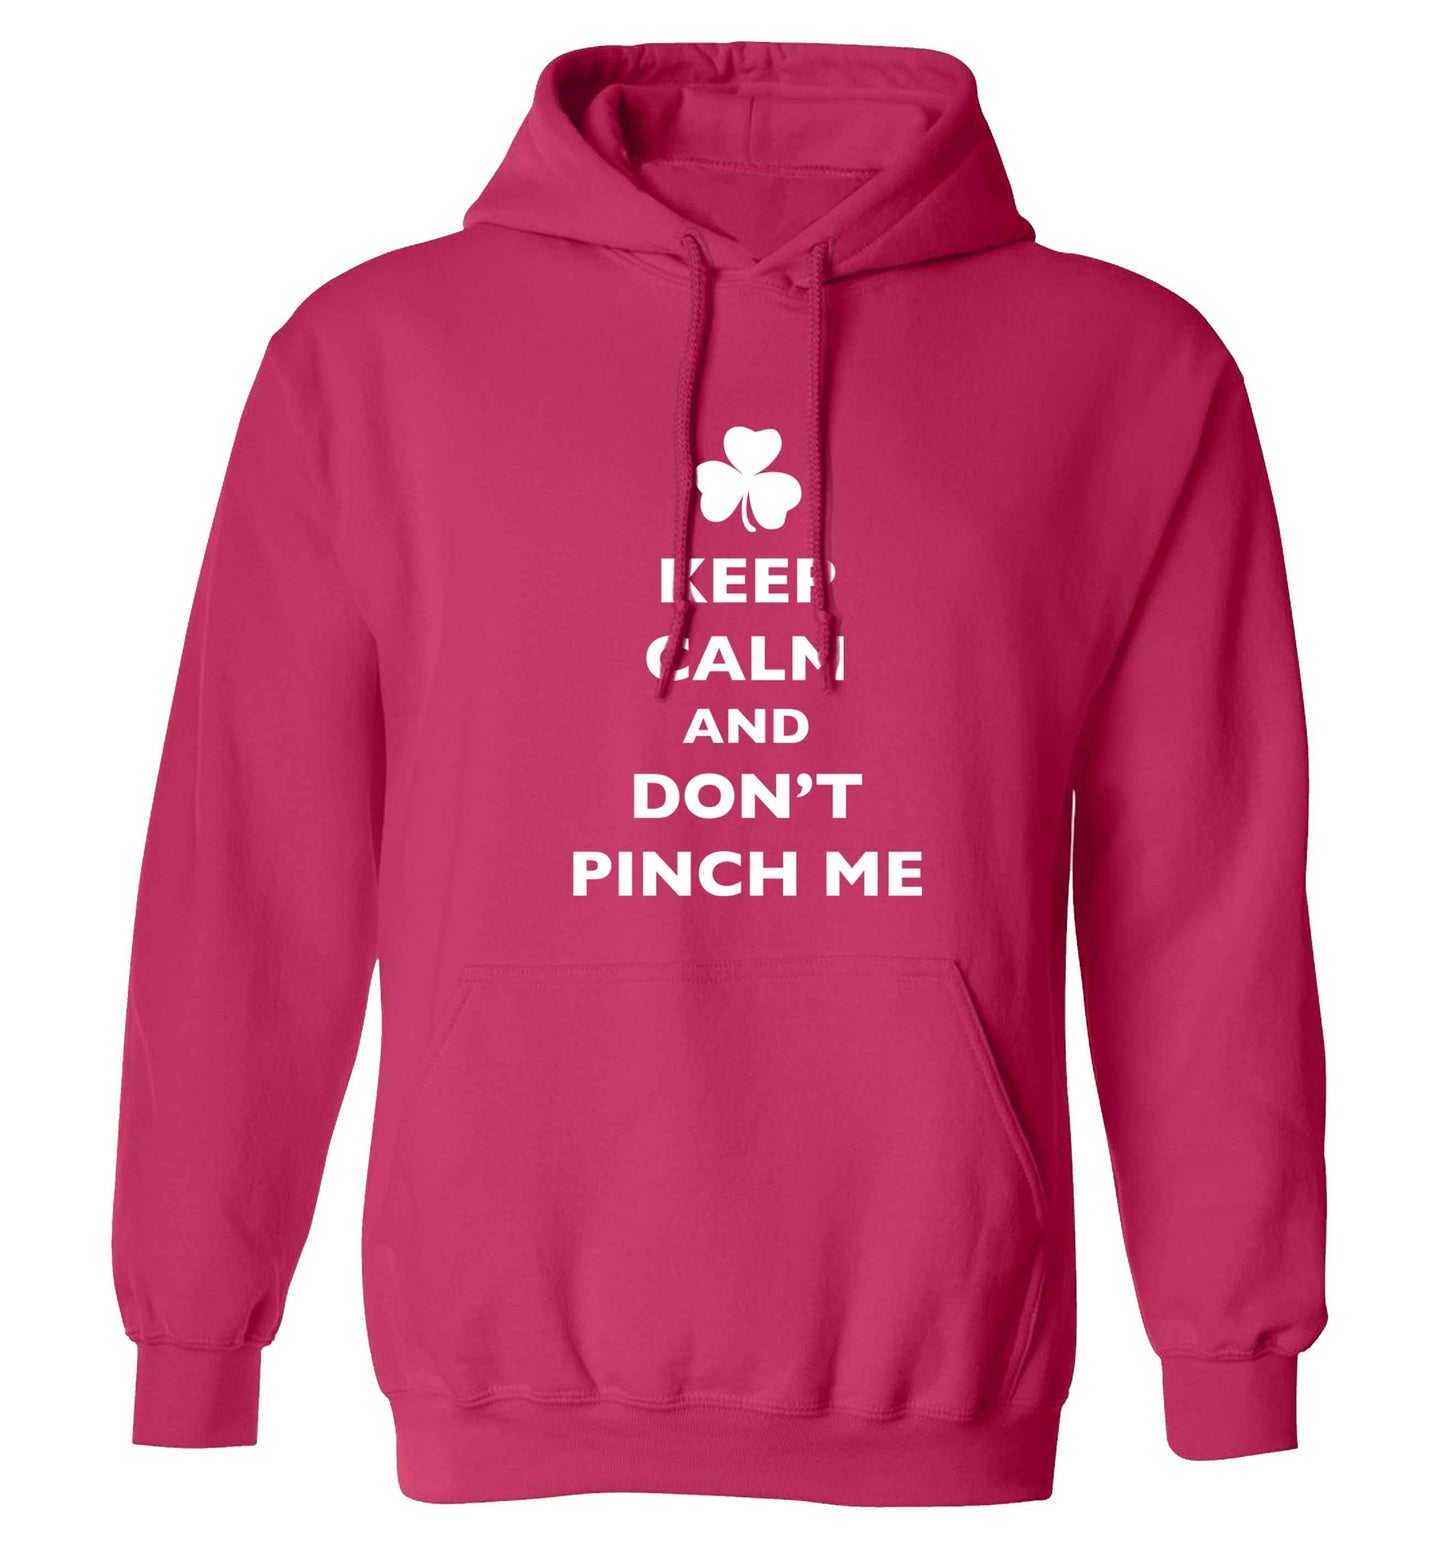 Keep calm and don't pinch me adults unisex pink hoodie 2XL